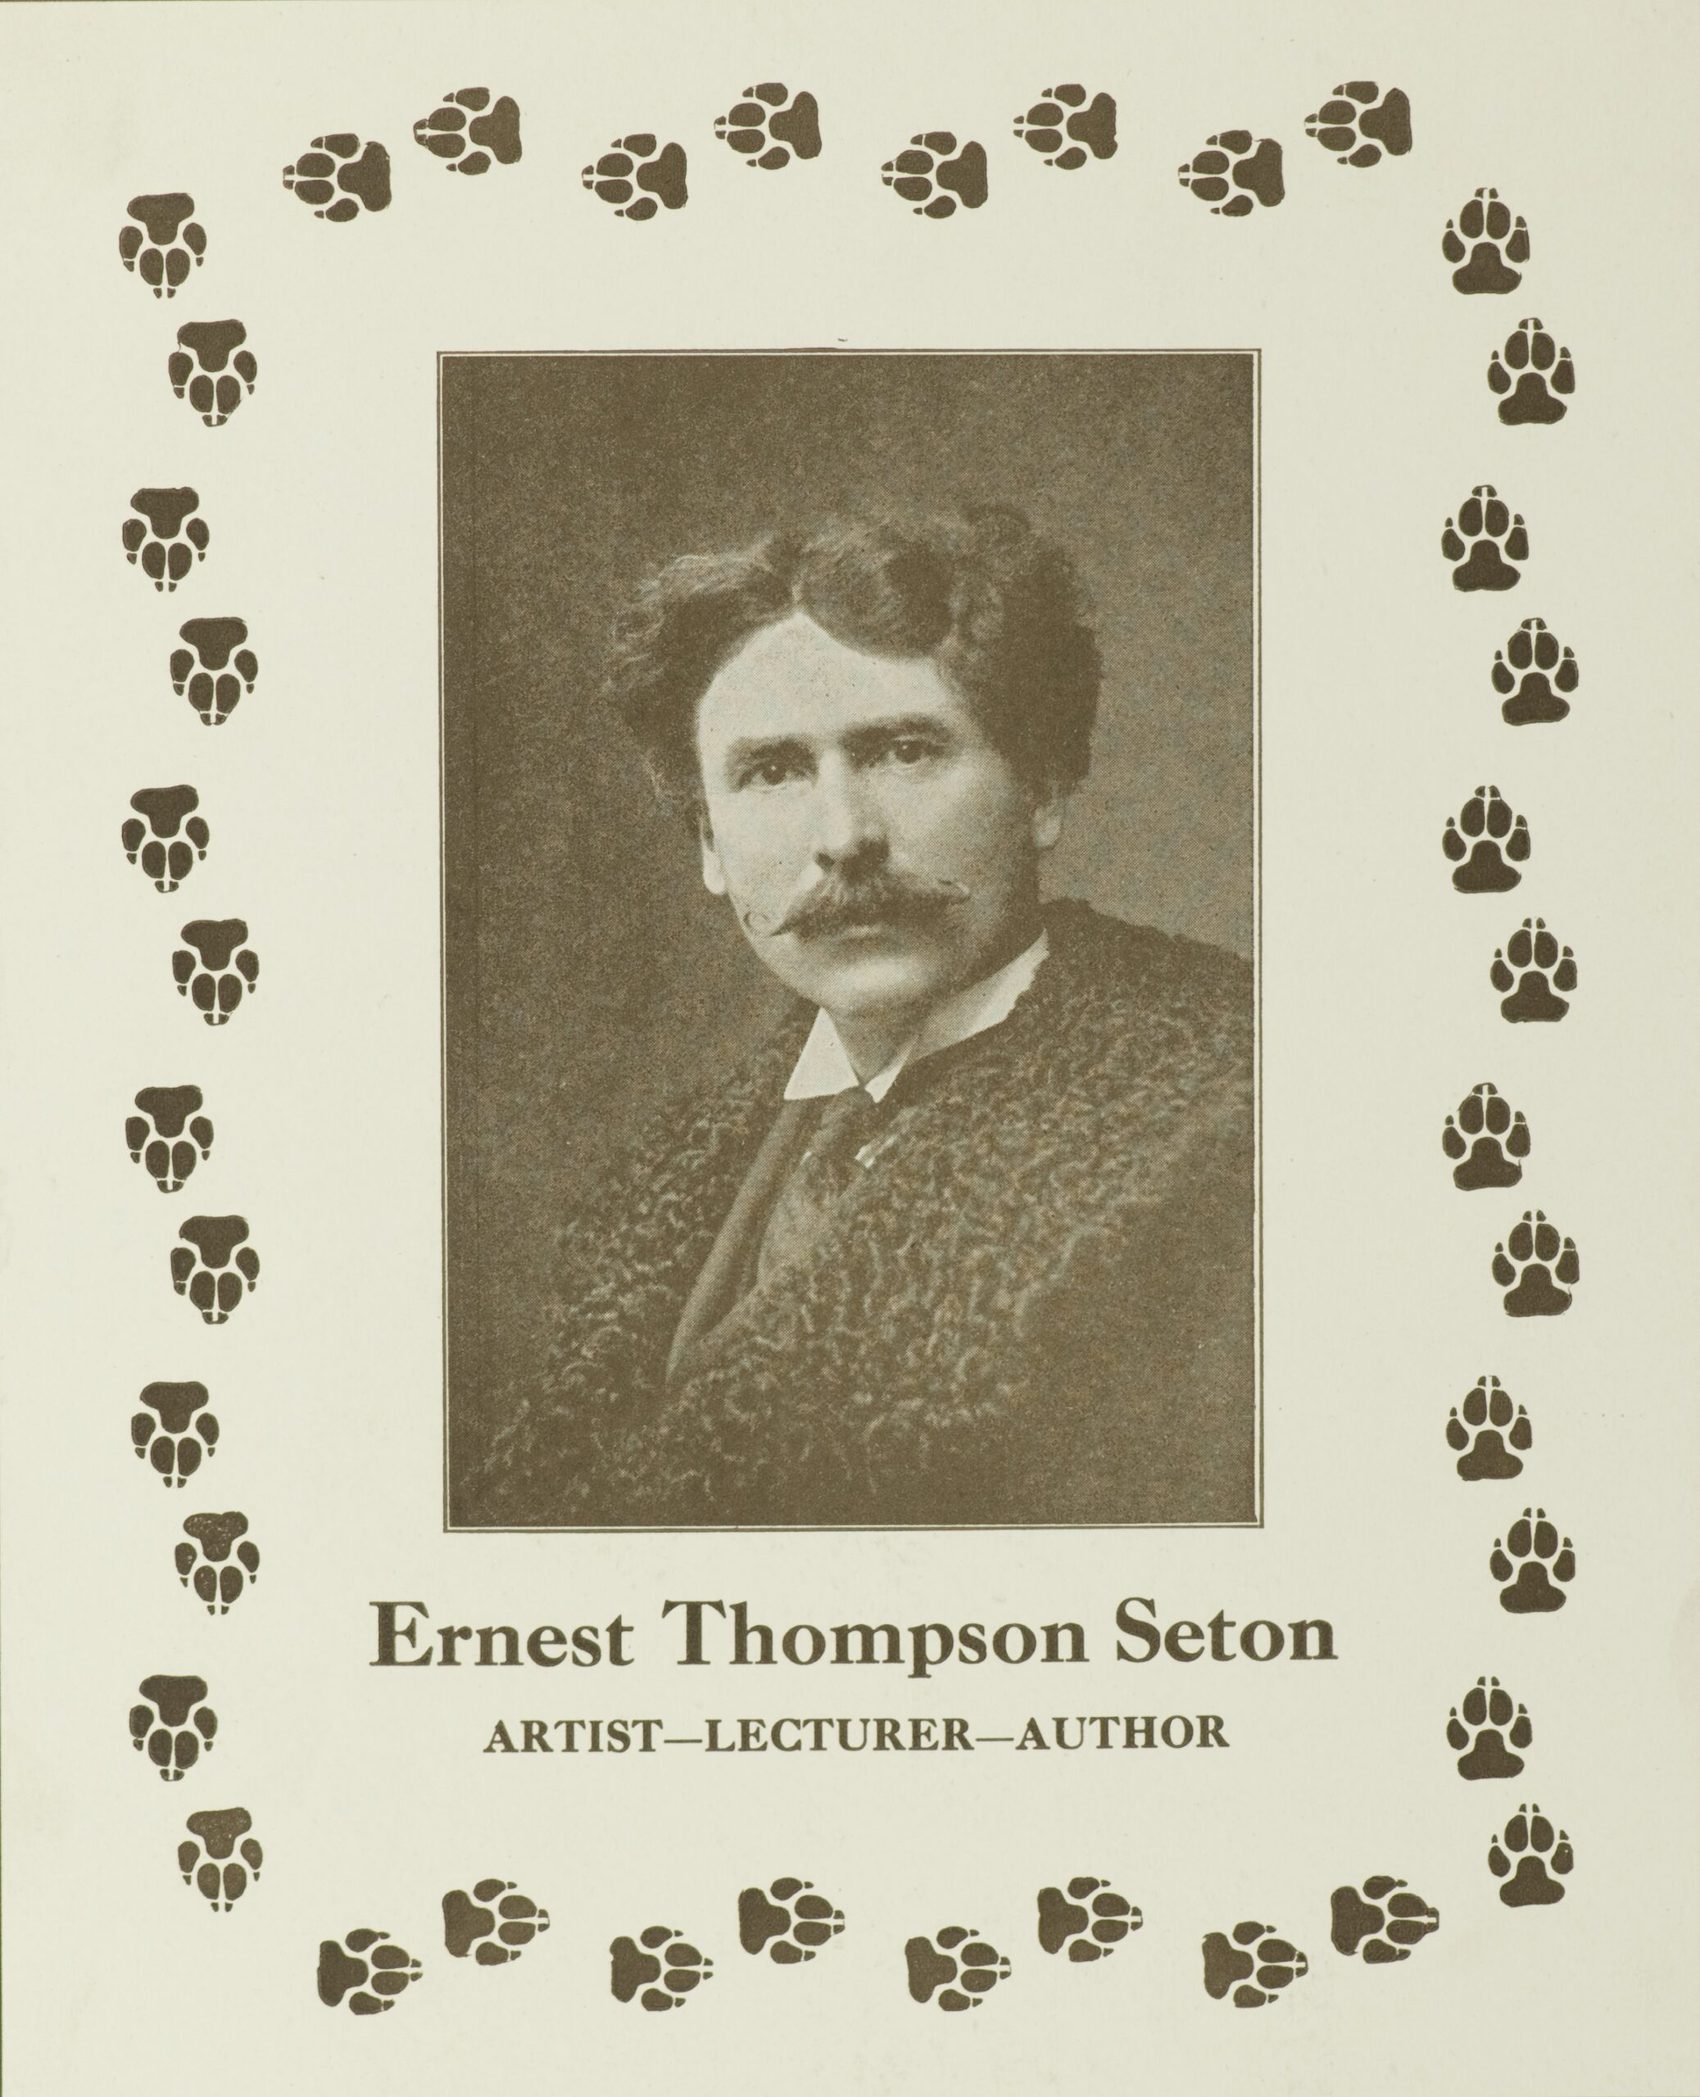 Best Seller and Media Star 1903-1909 Biography